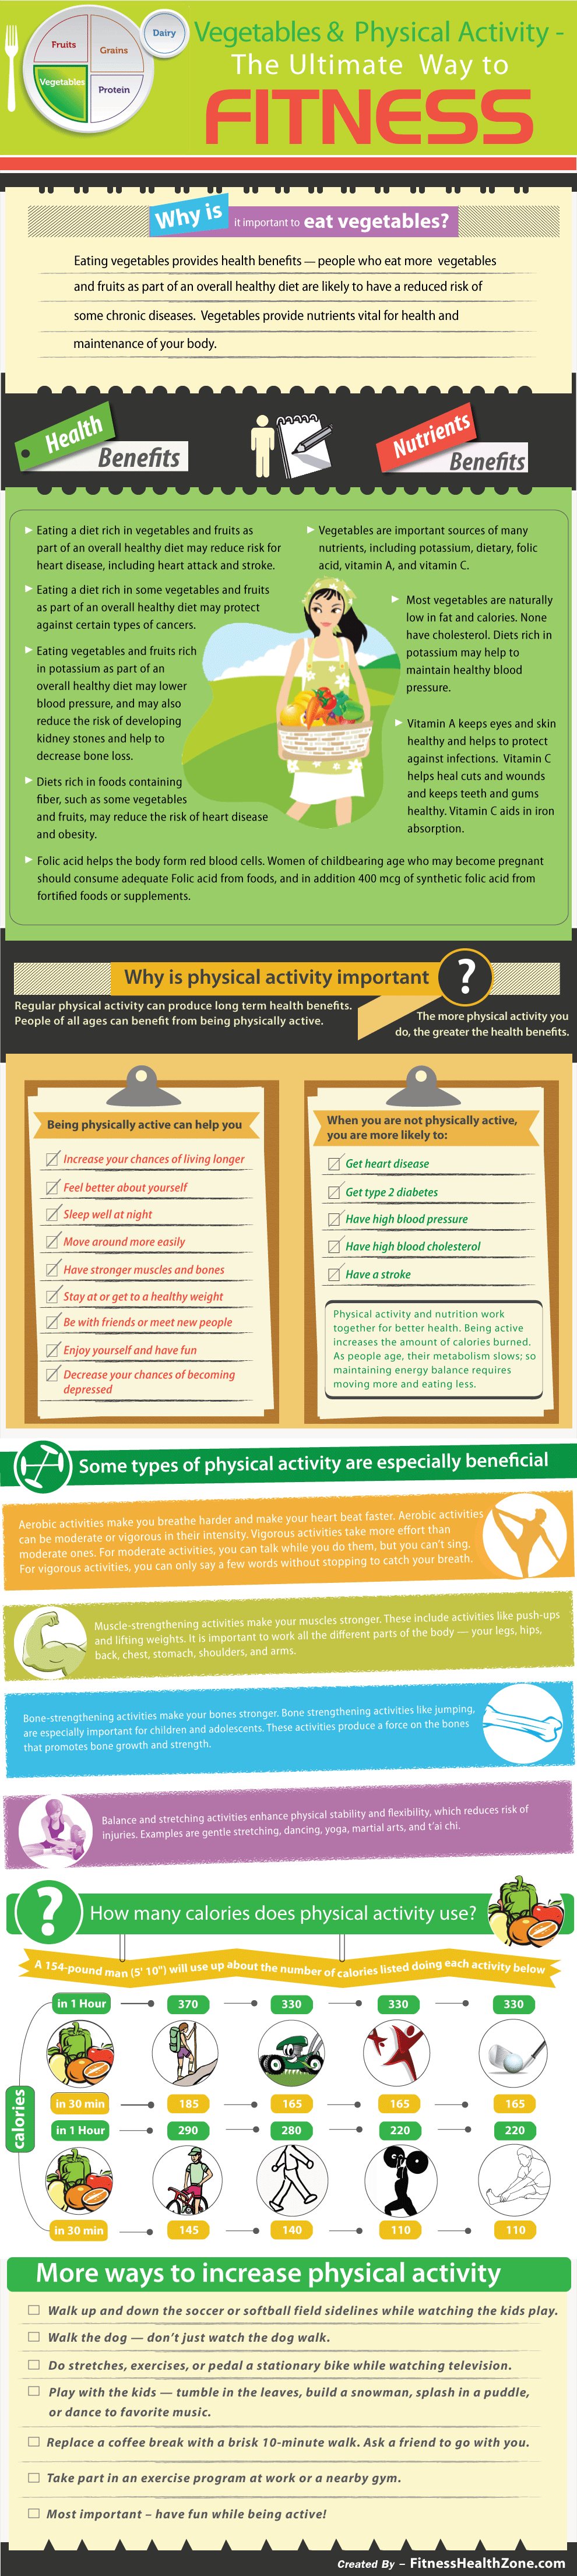 Fitness Through Vegetables and Physical Activity [Infographic]